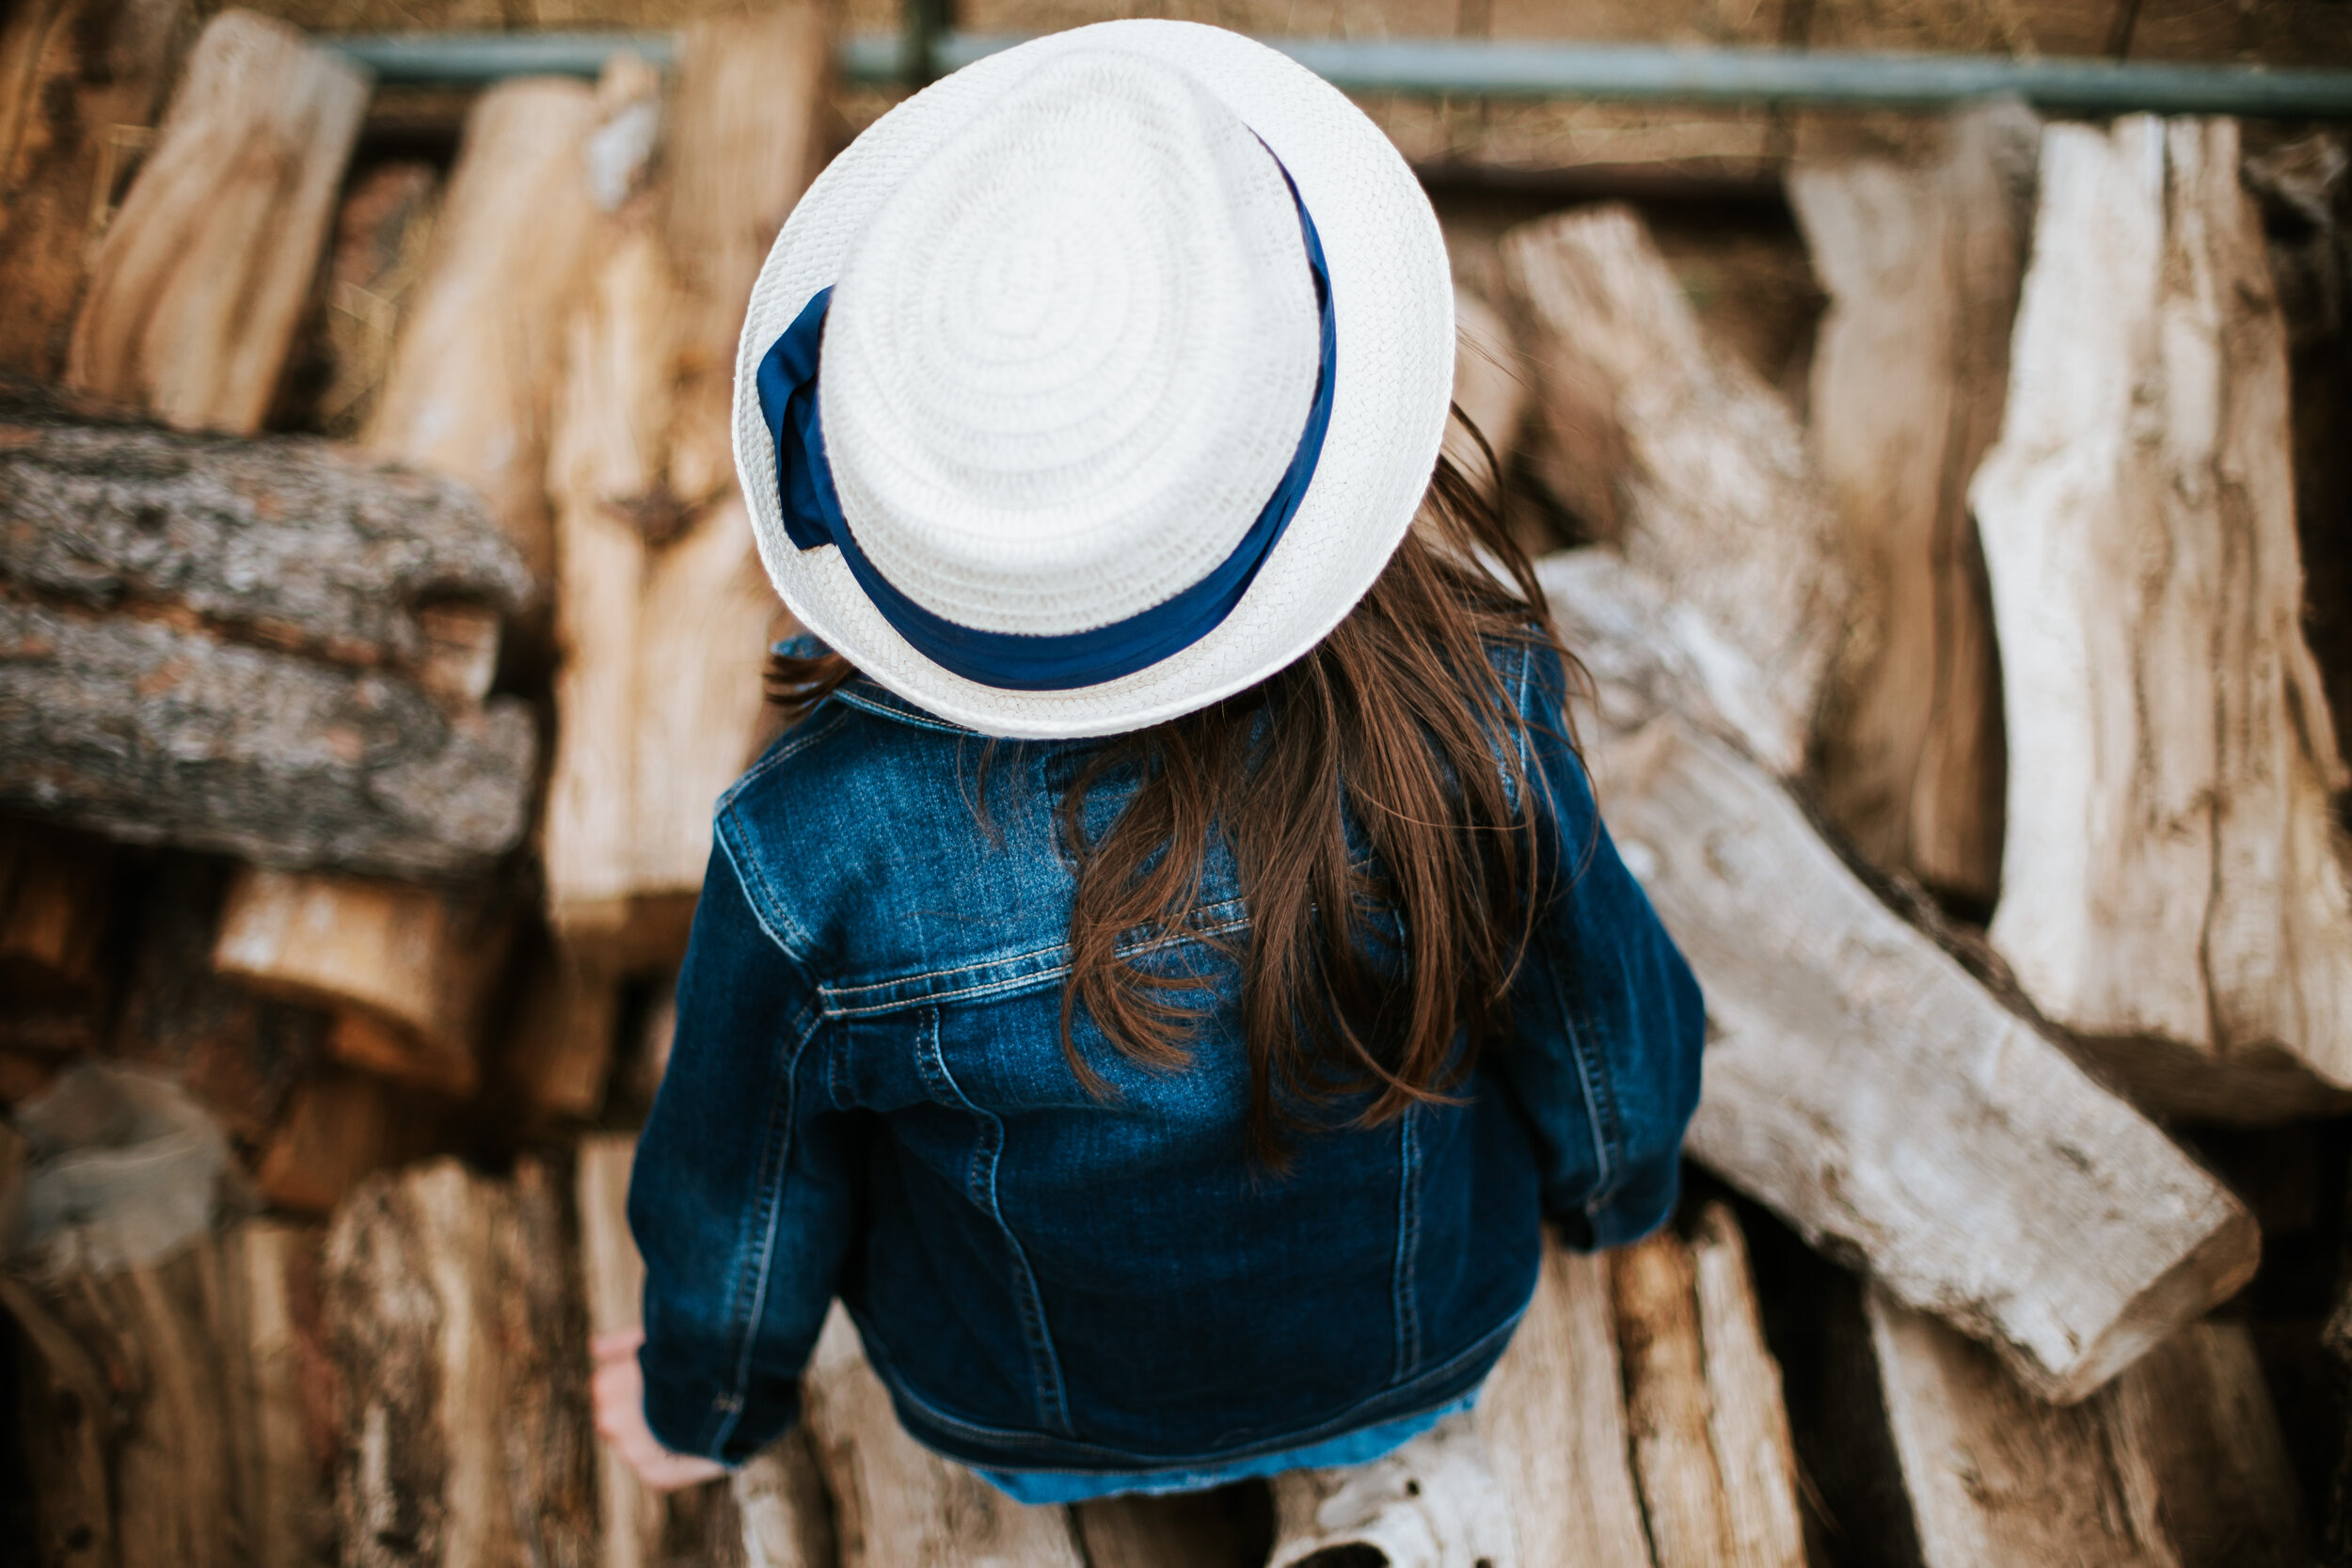  Little girl in a blue coat and white hat gazing at the firewood pile that would soon be needed as the air chills #tealawardphotography #texasfamilyphotographer #amarillophotographer #amarillofamilyphotographer #lifestylephotography #fallphotos #familyphotoshoot #family #lovingsiblings #photographytips #familyphotos #naturalfamilyinteraction 